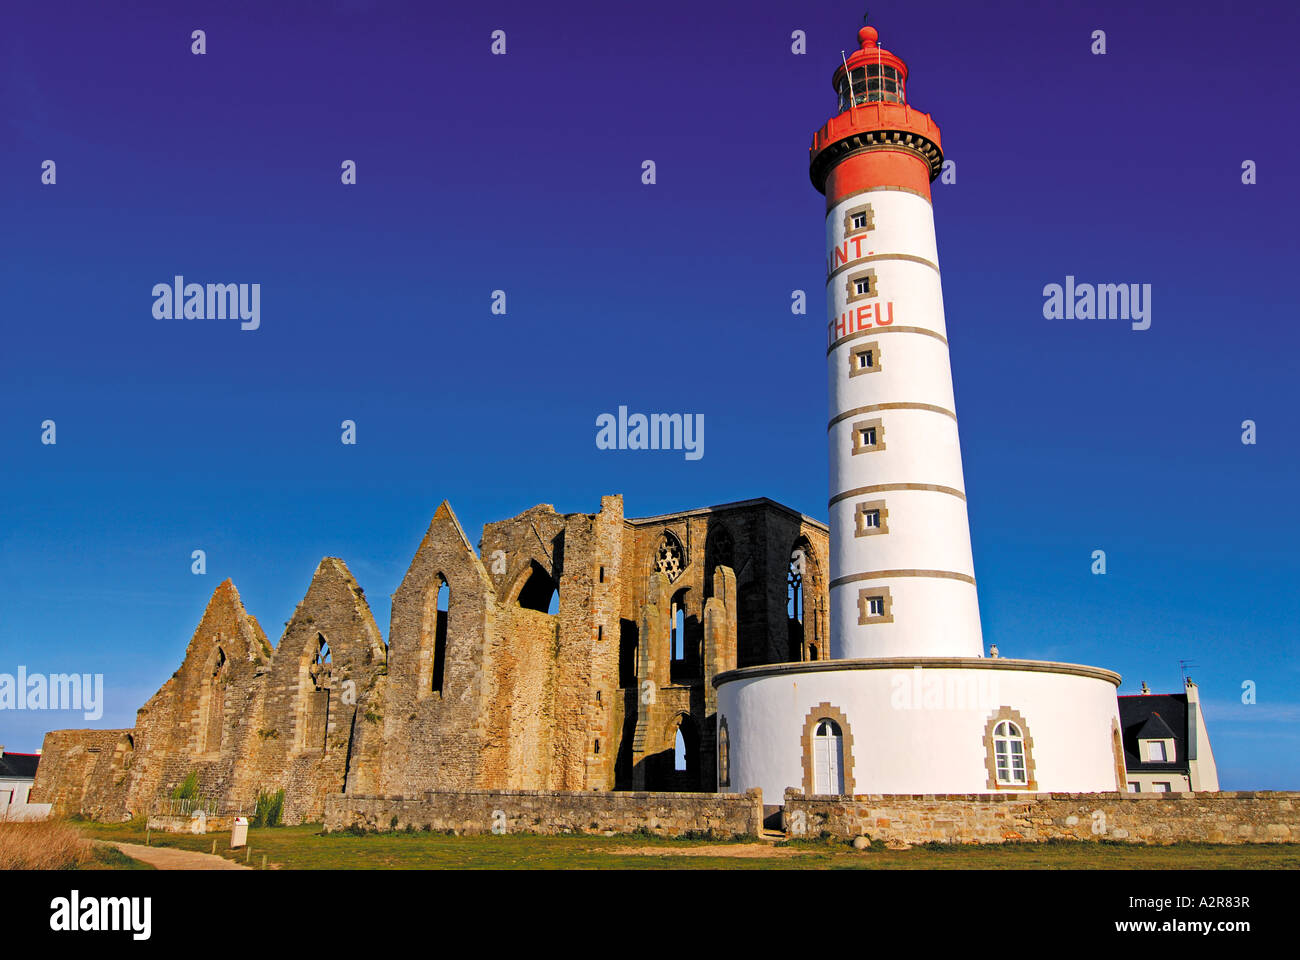 Monastary ruins and lighthouse of St. Mathiew, Point St. Mathieu, Finistére, Brittany, France Stock Photo